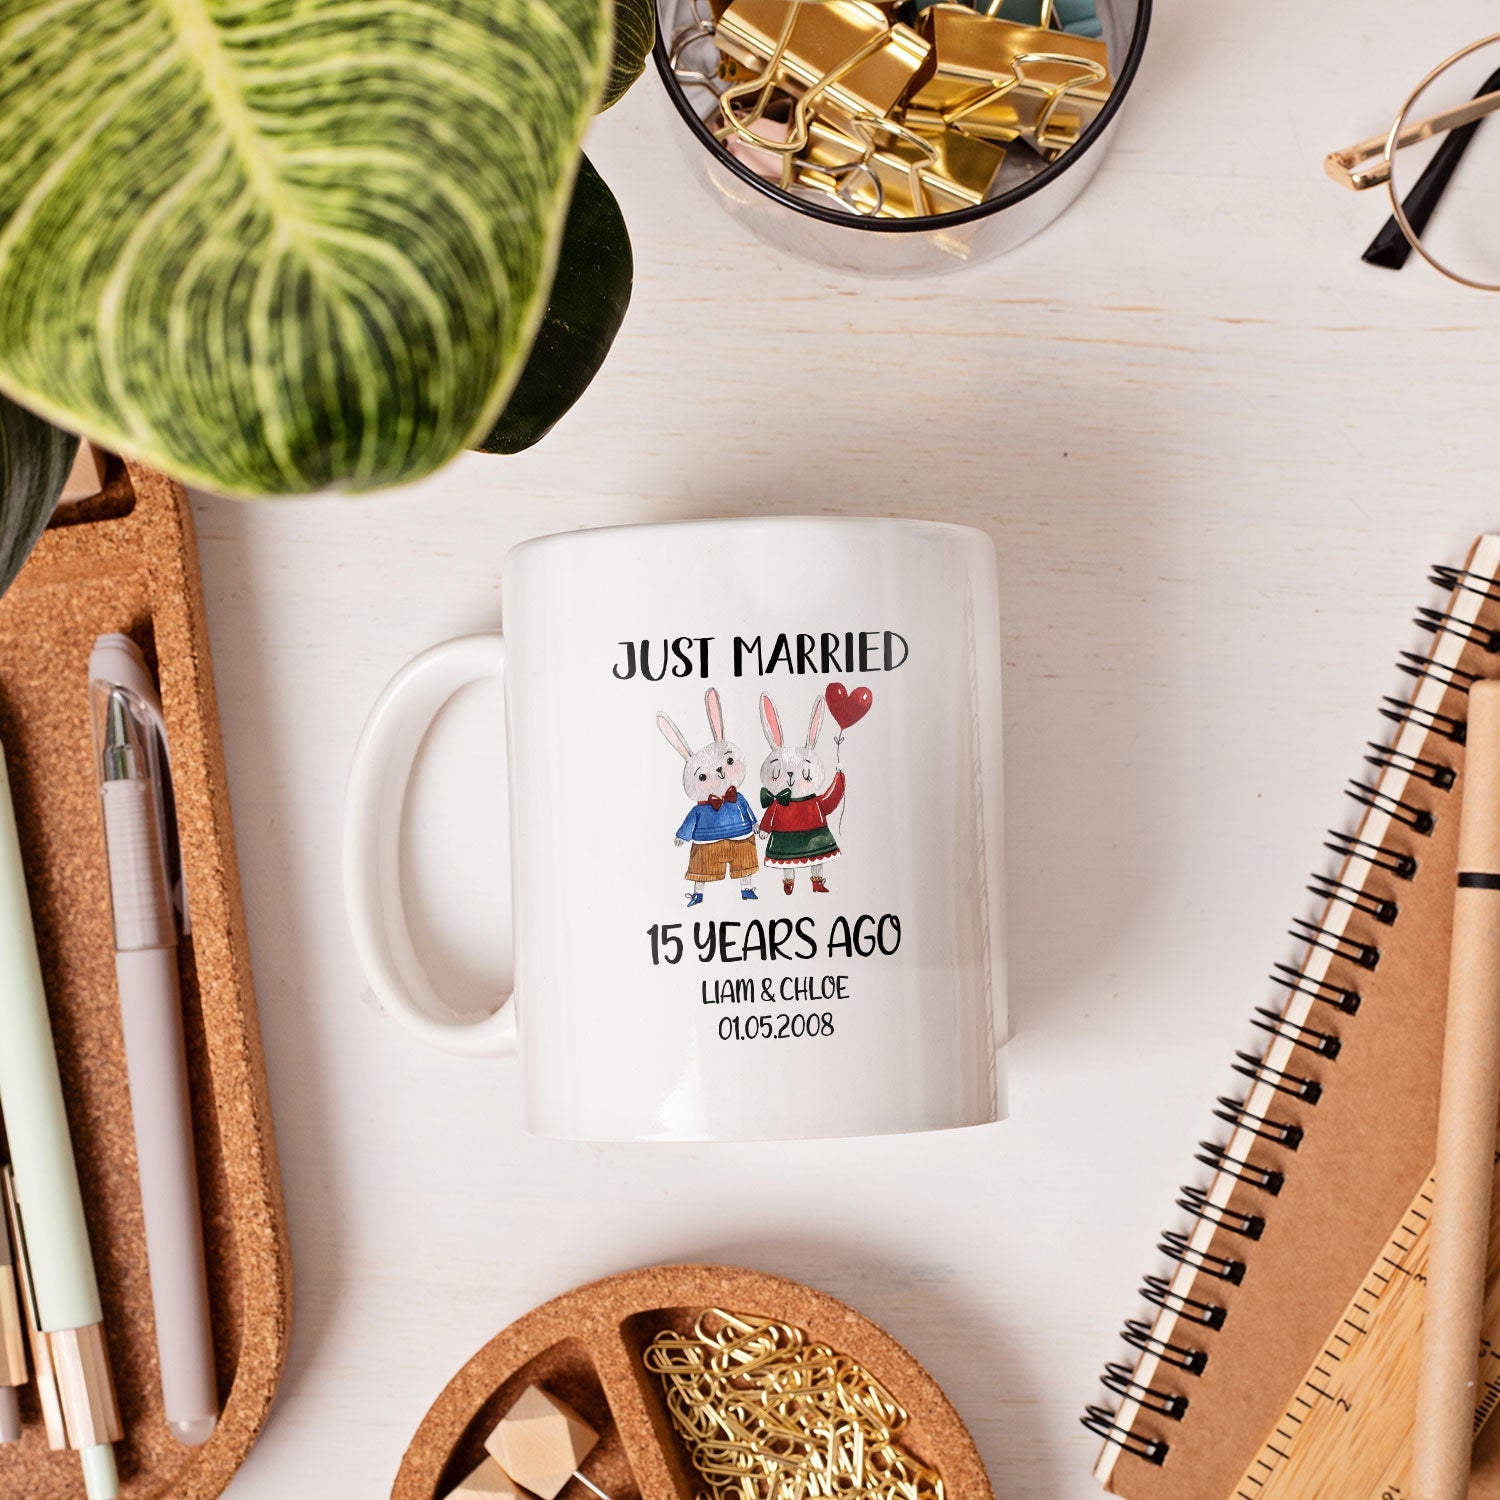 Just Married 15 Years Ago - Personalized 15 Year Anniversary gift for him for her - Custom Mug - MyMindfulGifts